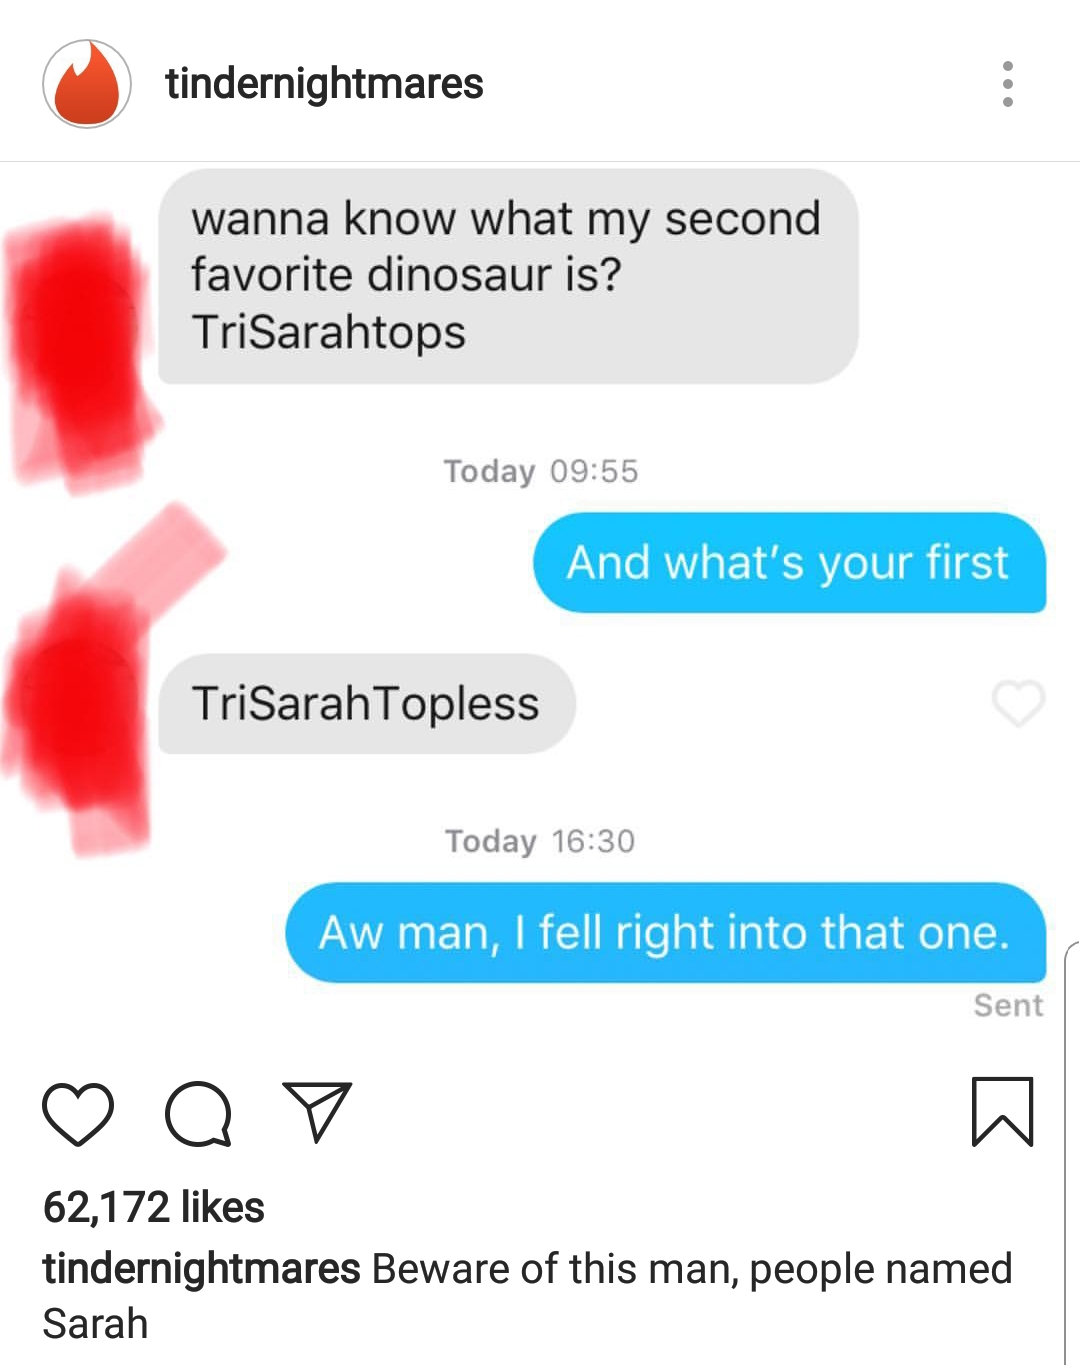 memes - web page - tindernightmares wanna know what my second favorite dinosaur is? TriSarahtops Today And what's your first TriSarahTopless Today Aw man, I fell right into that one. Sent Qo 62,172 tindernightmares Beware of this man, people named Sarah